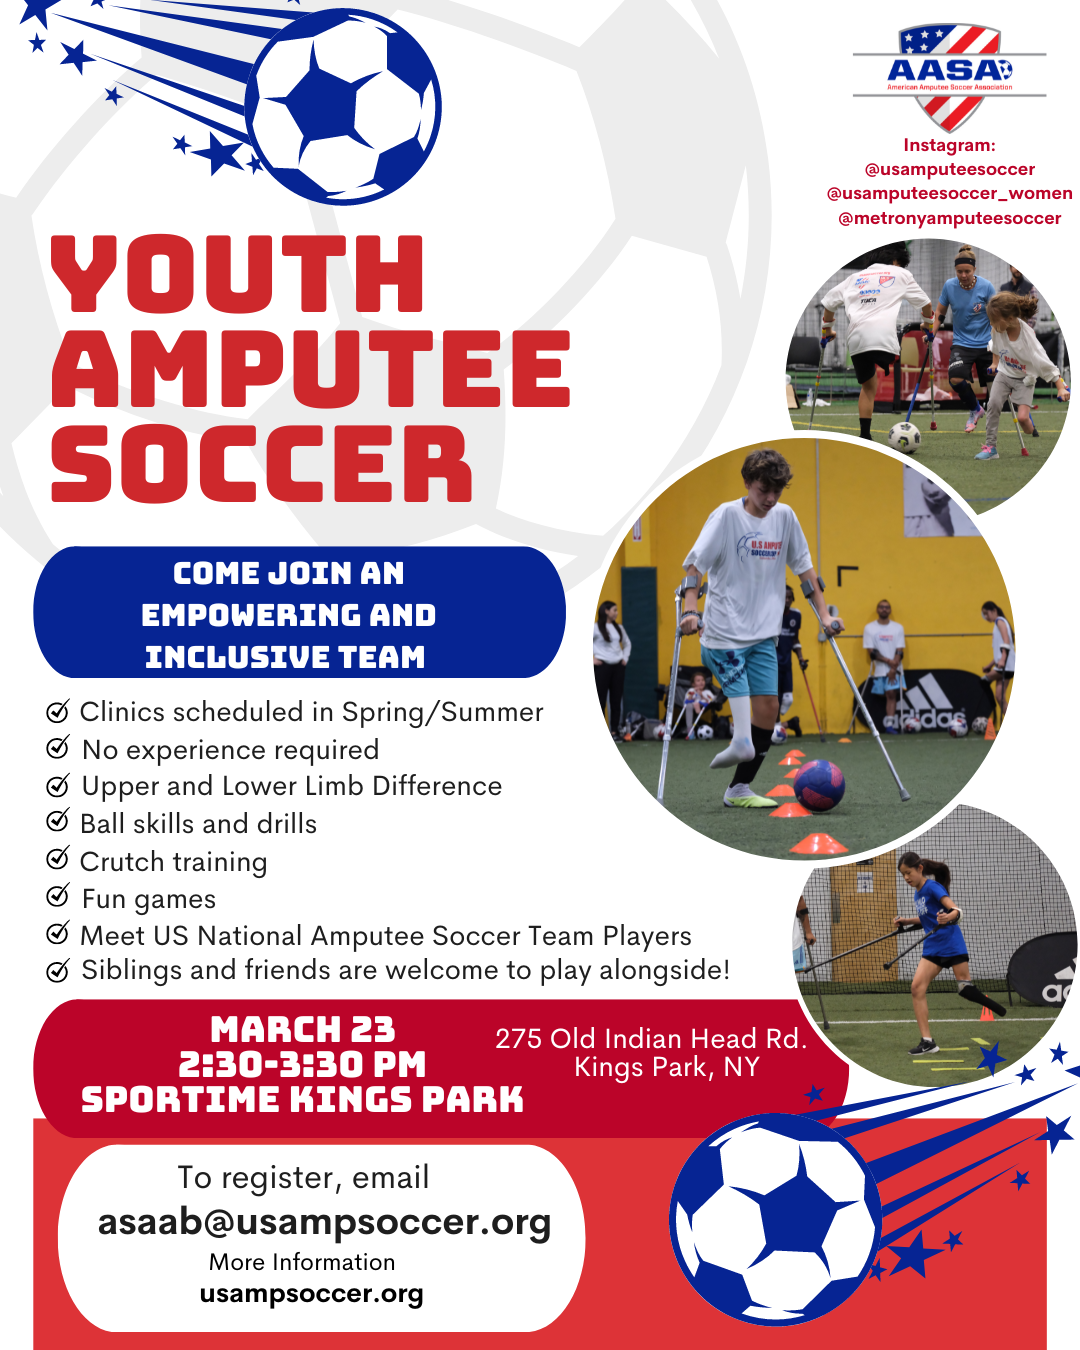 Come join an empowering and inclusive team! Youth Amputee Soccer Saturday, March 23, 2024 2:30 to 3:30 PM at Sportime Kings Park. To register email asaab@usampsoccer.org